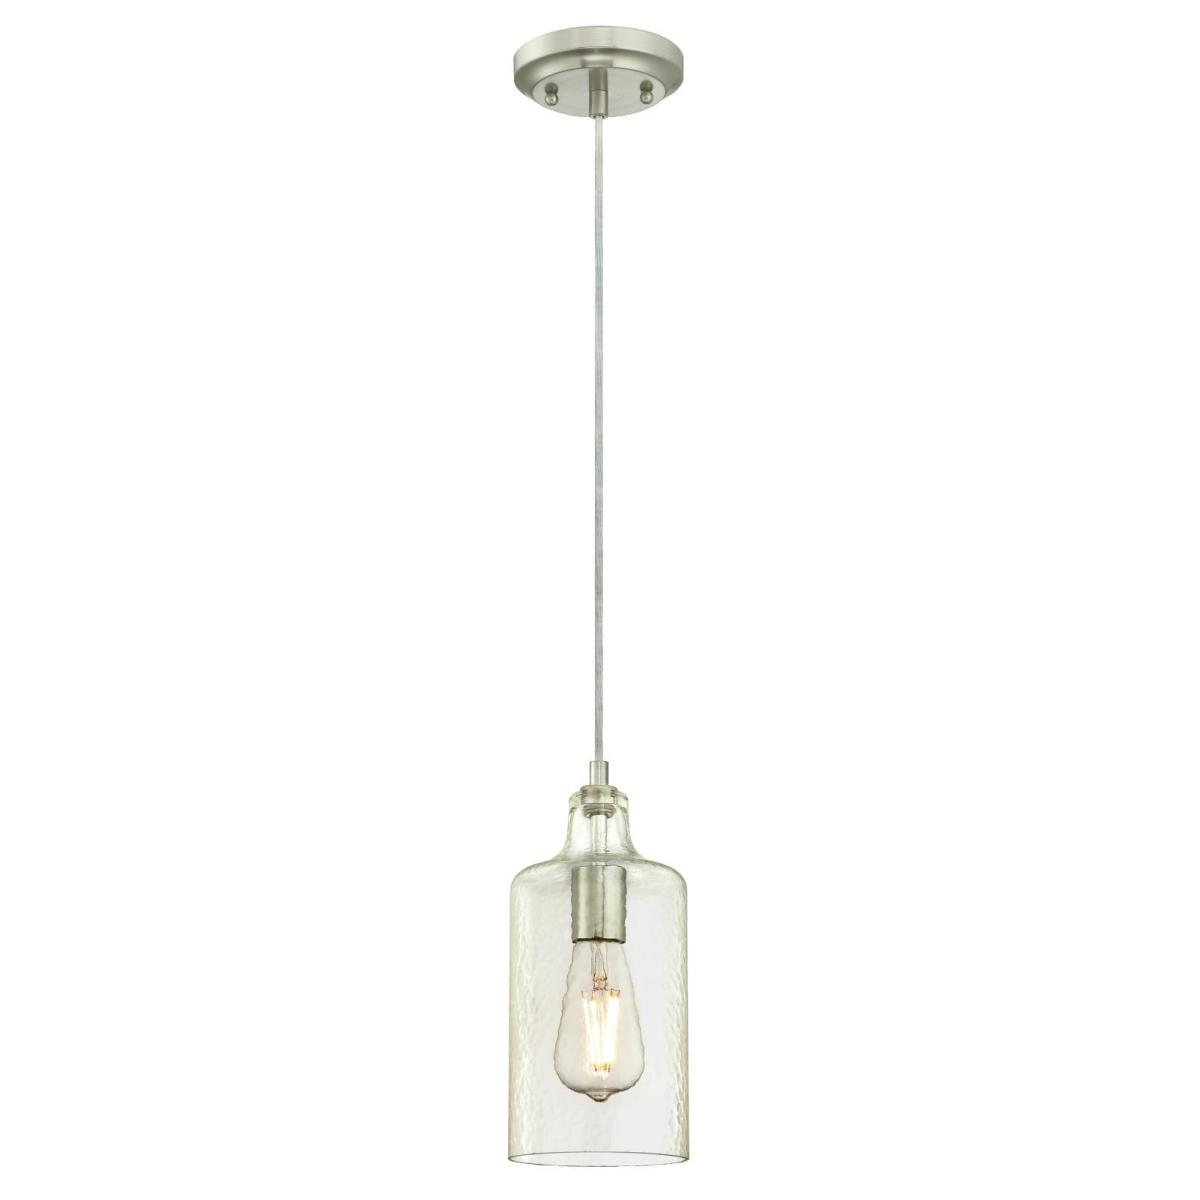 1 Light Mini Pendant Brushed Nickel Finish with Clear Textured Glass